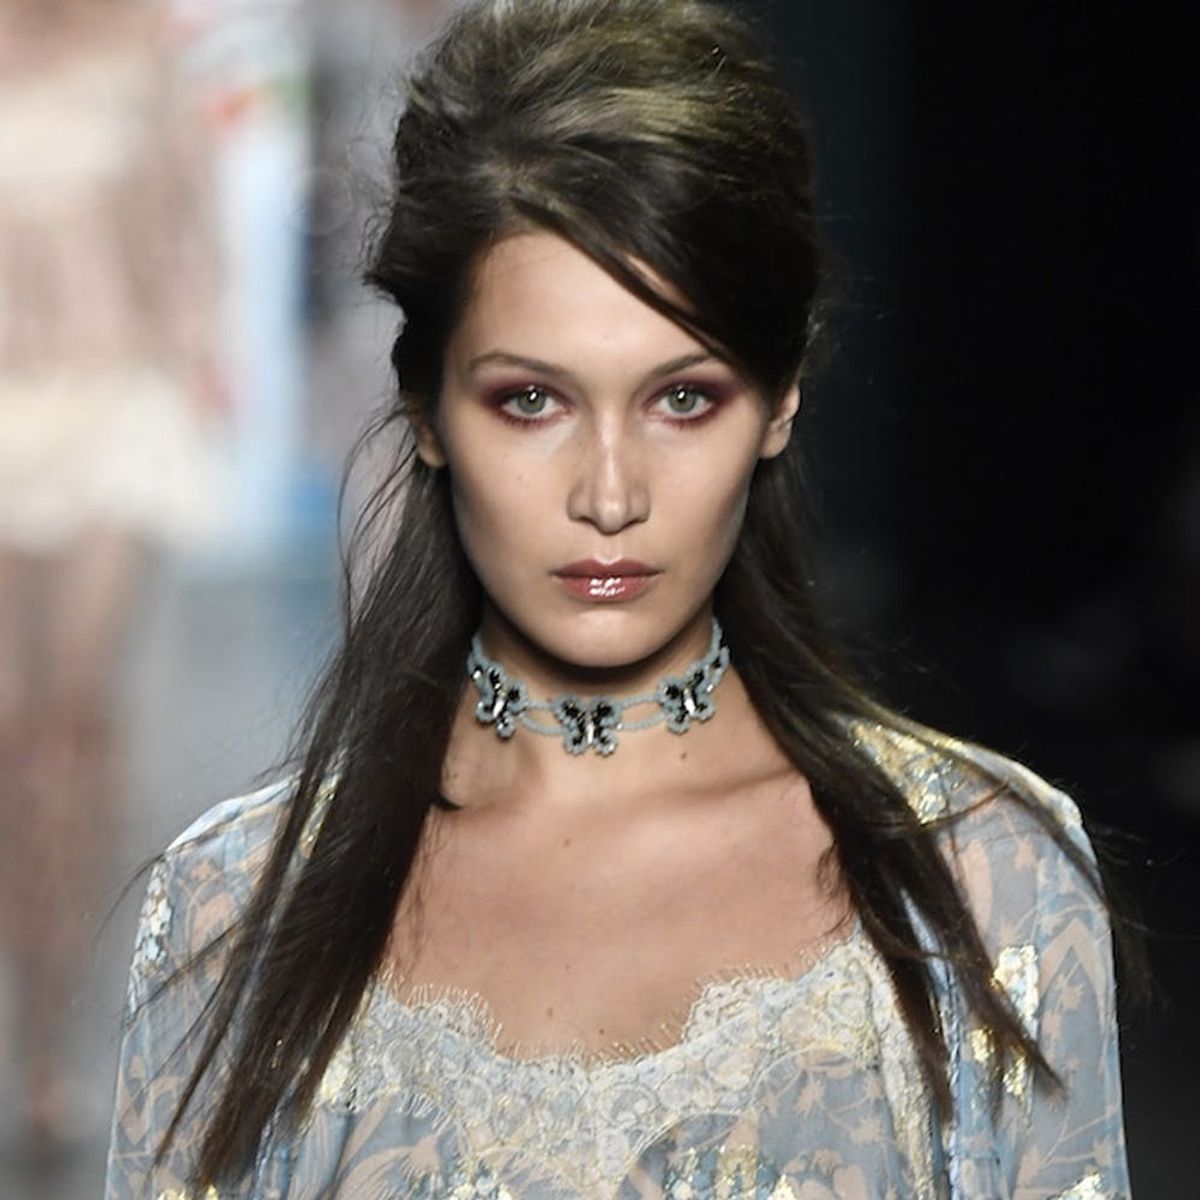 Bella Hadid Wants to Have a Clothing Line When She’s “Fully Done” With Modeling